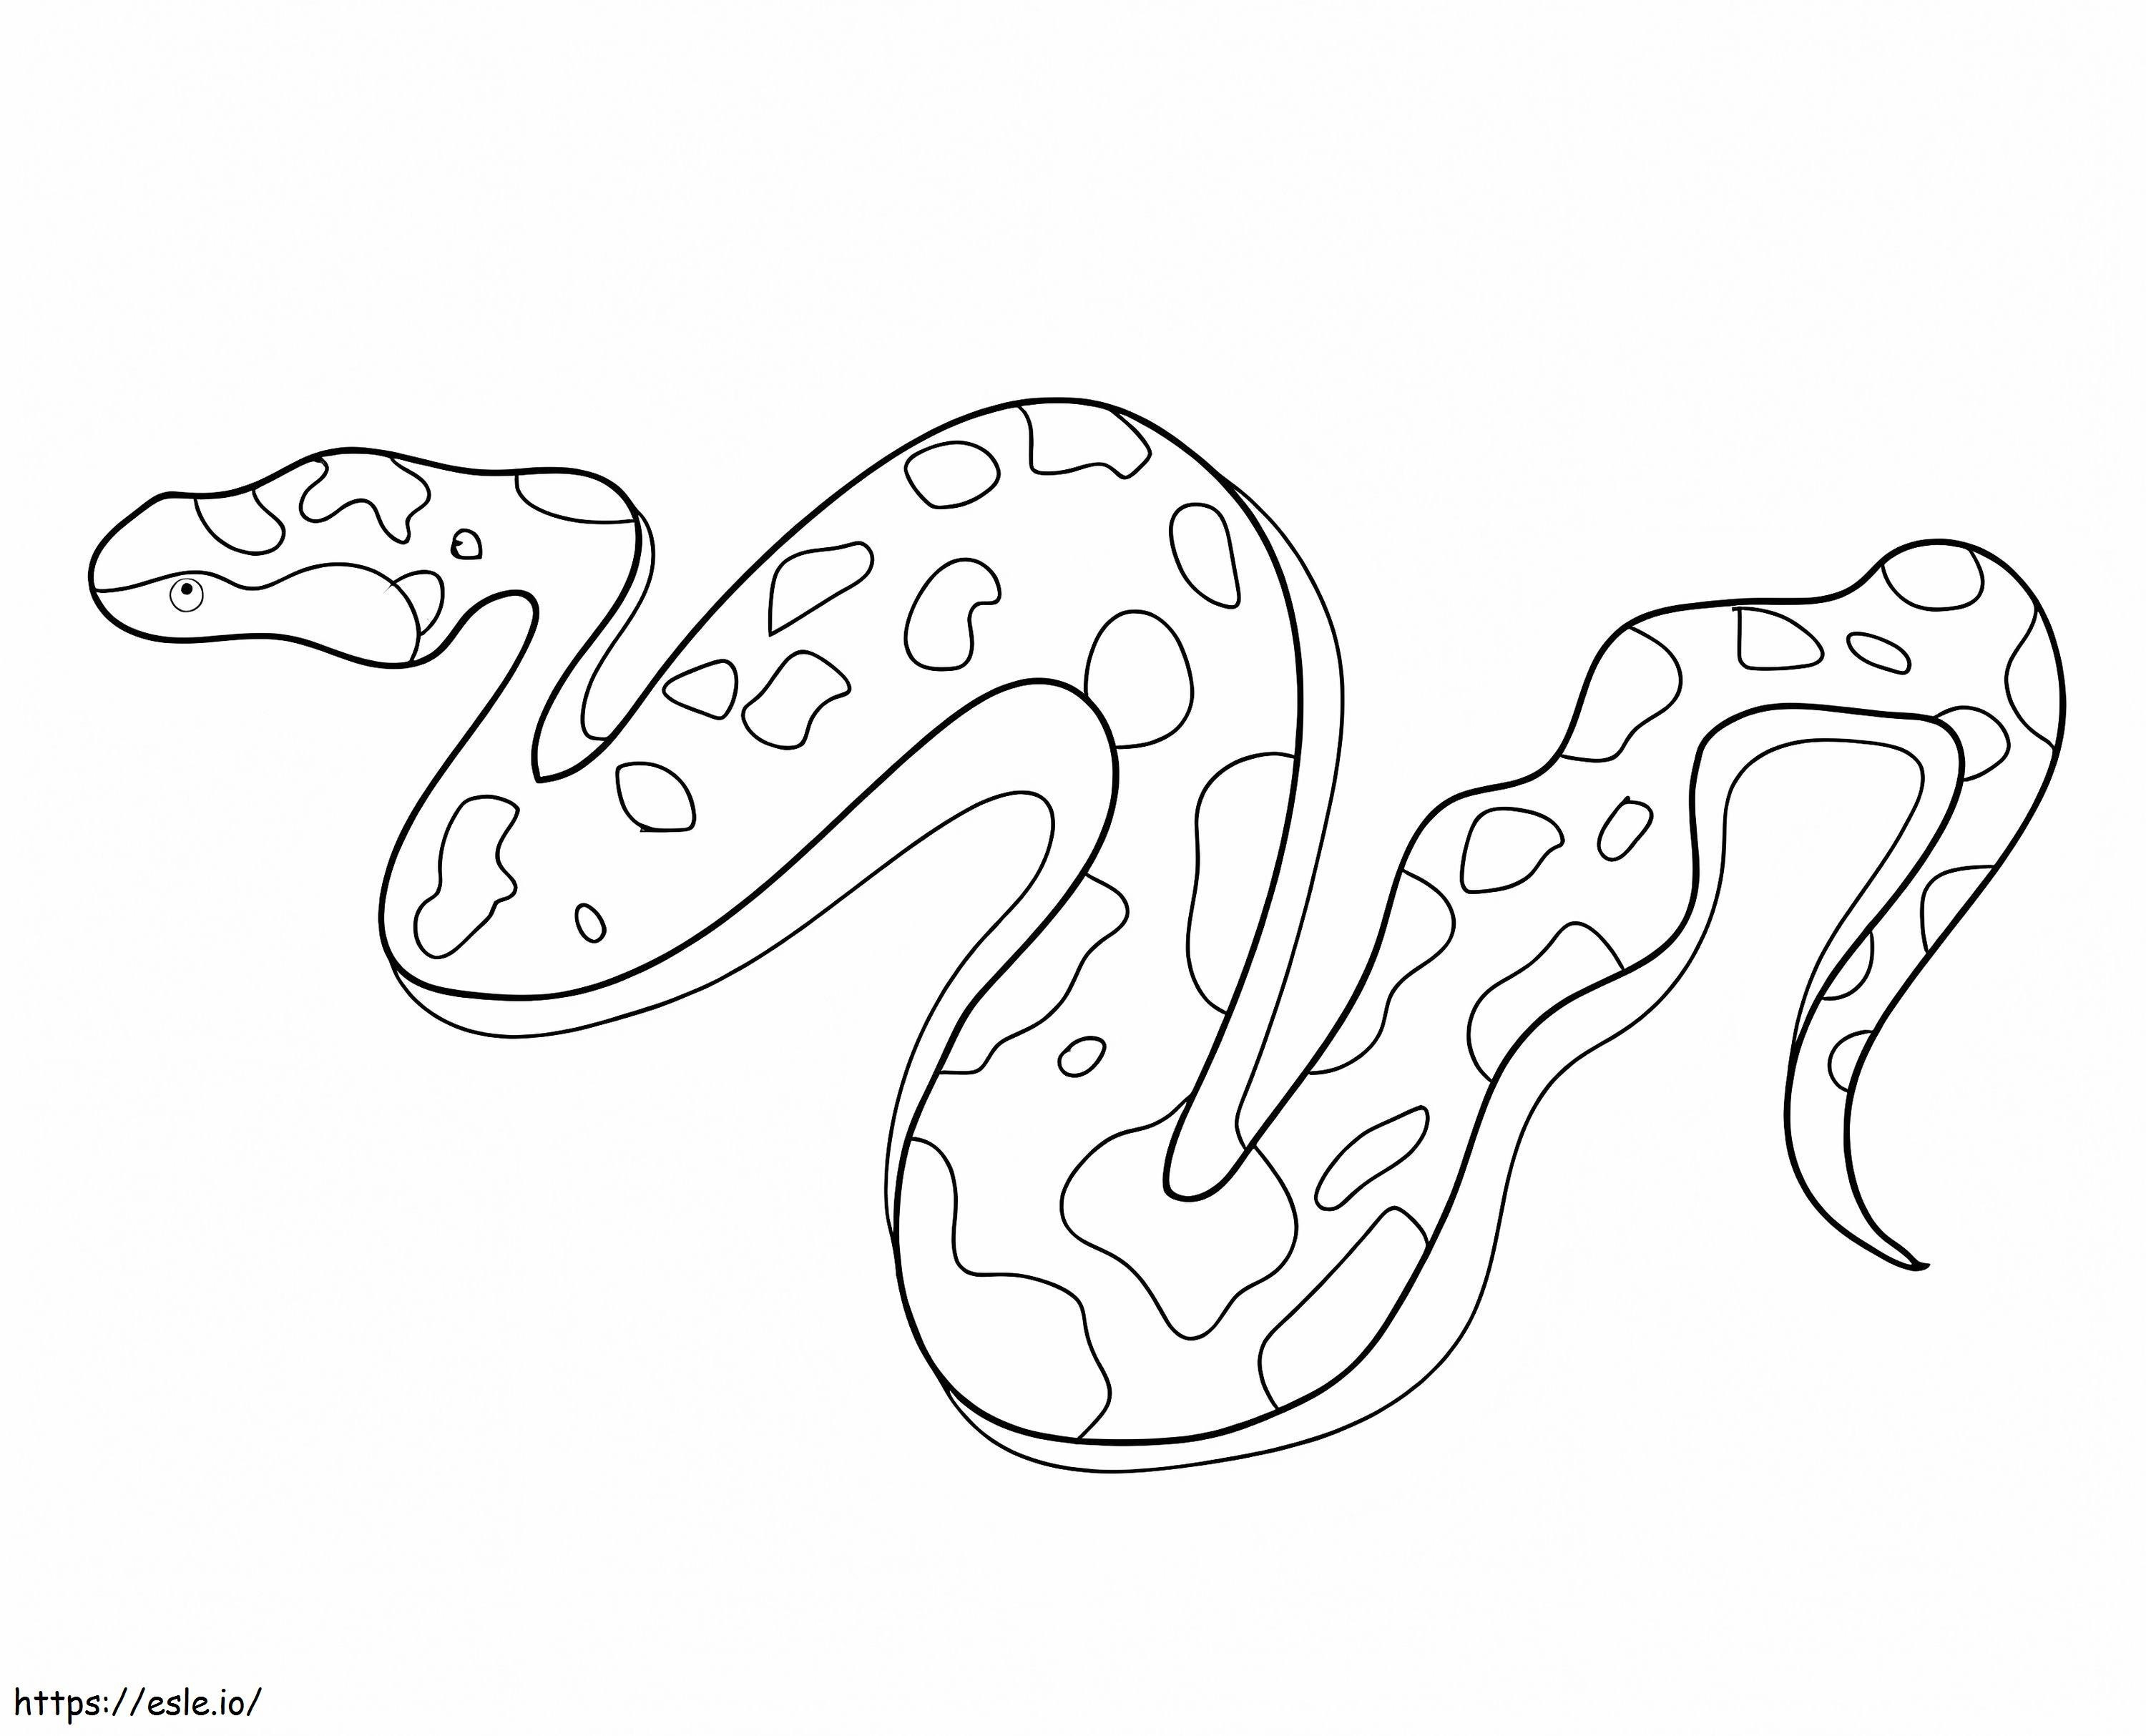 A Snake coloring page